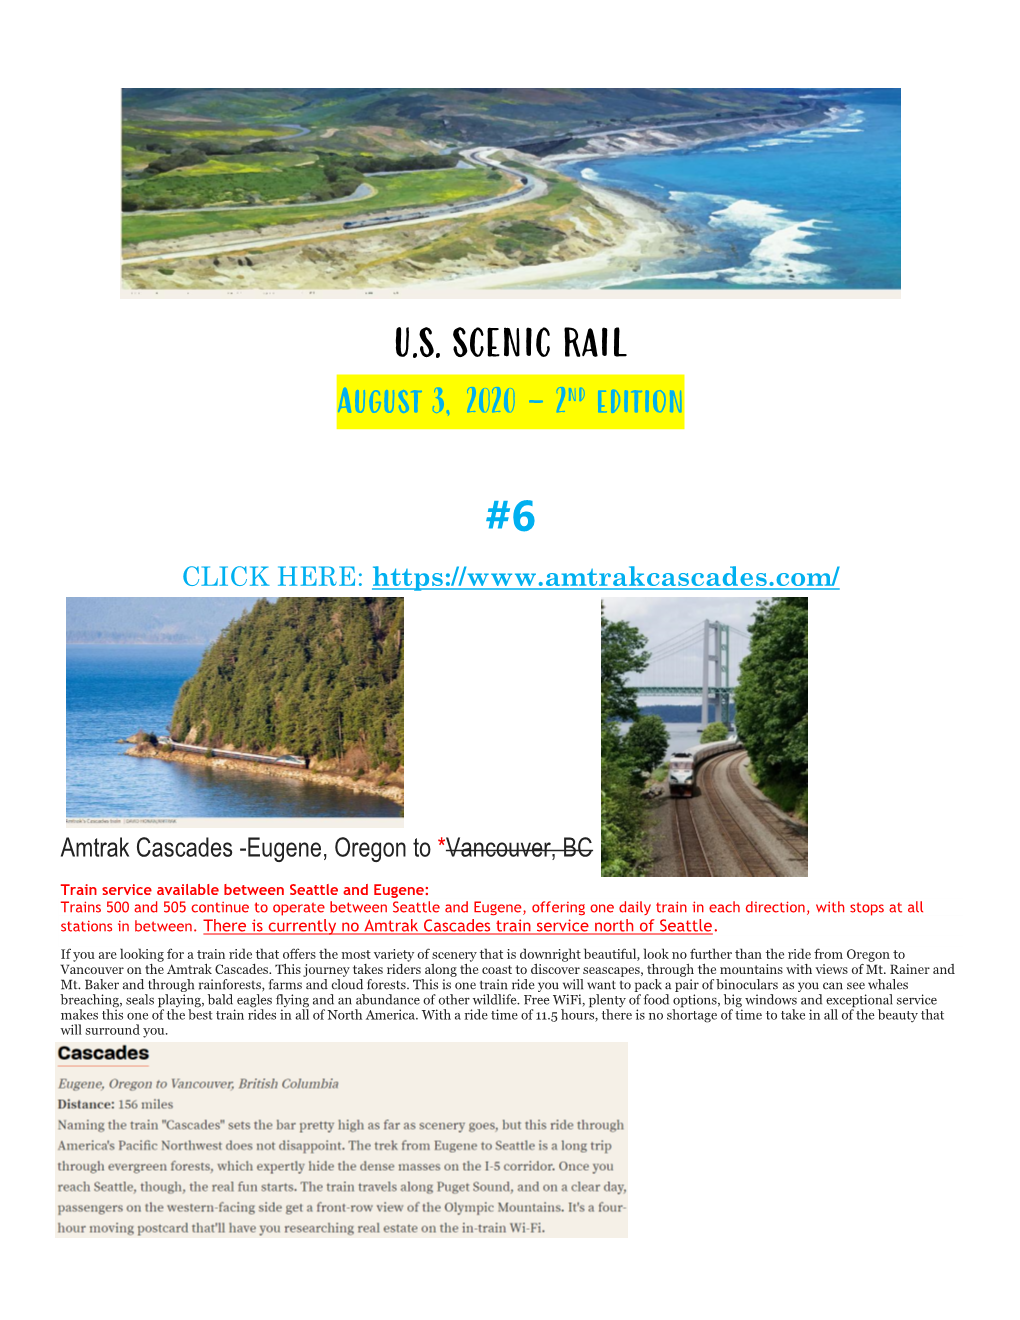 U.S. SCENIC RAIL August 3, 2020 – 2Nd Edition